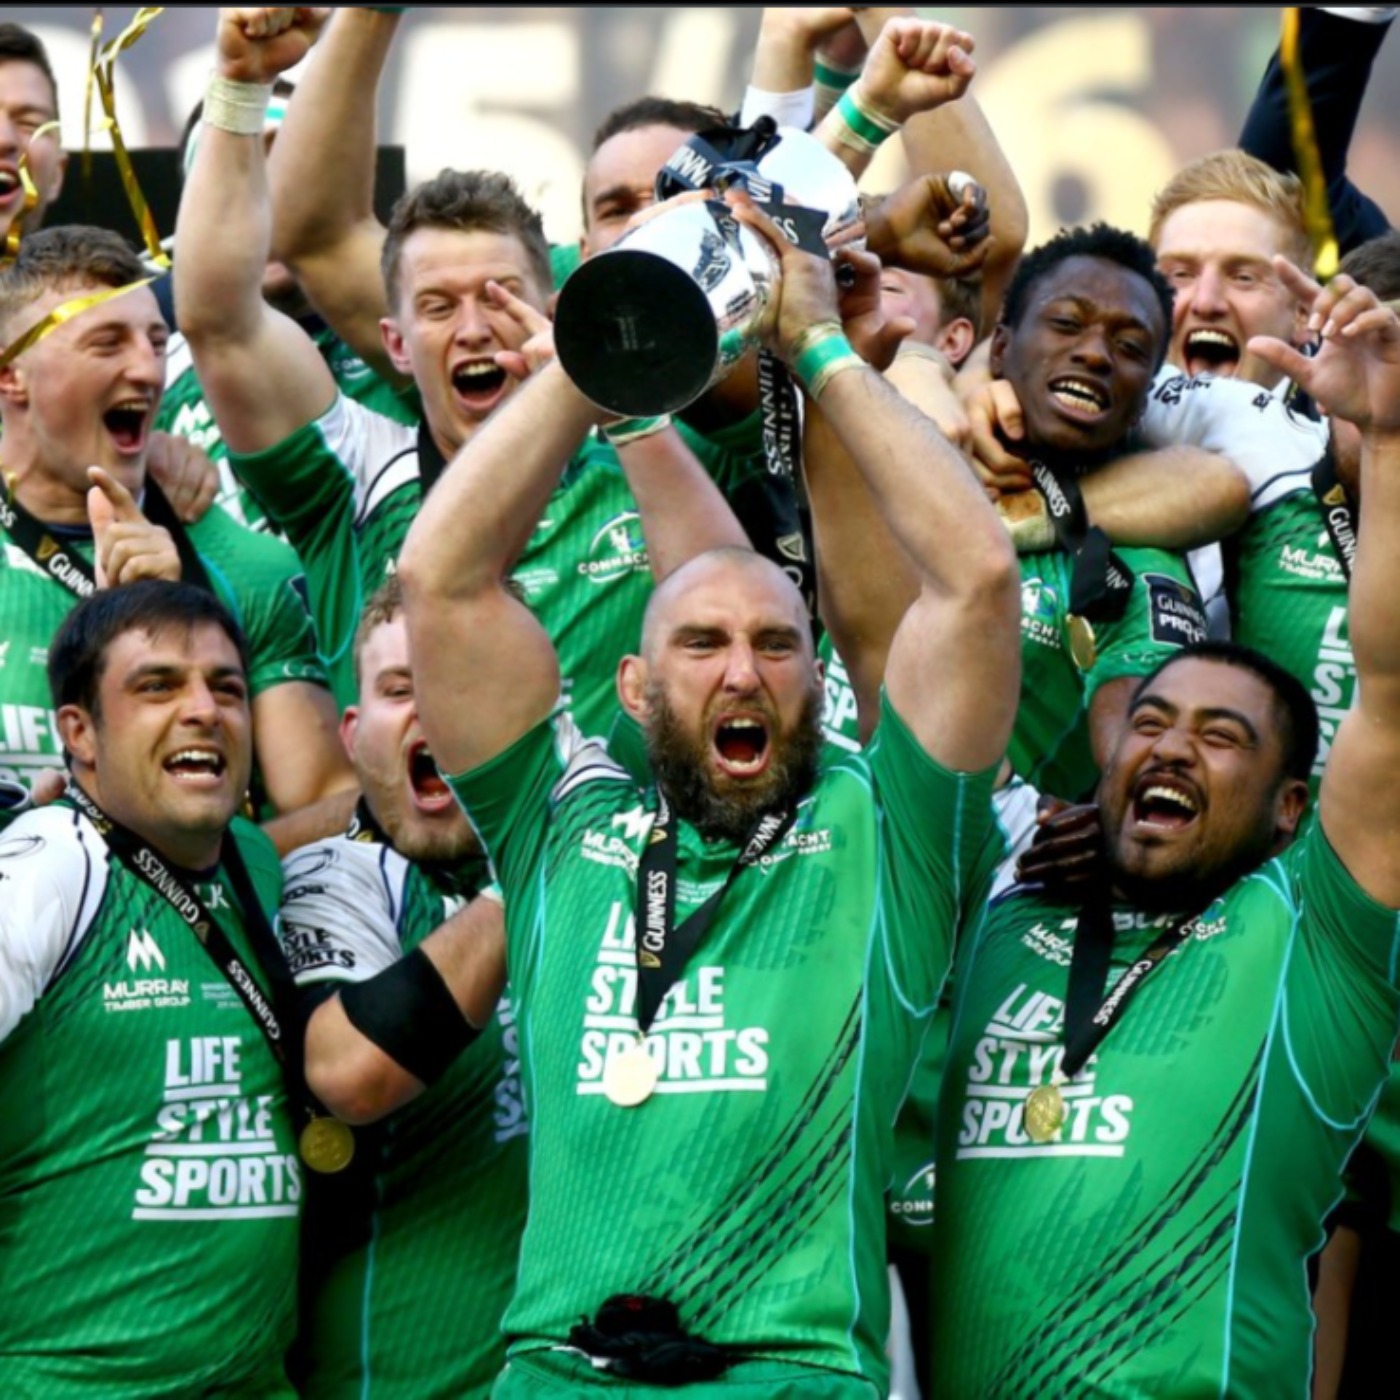 Glory Days - Connacht 20 Leinster 10 - Craggy Rugby podcast